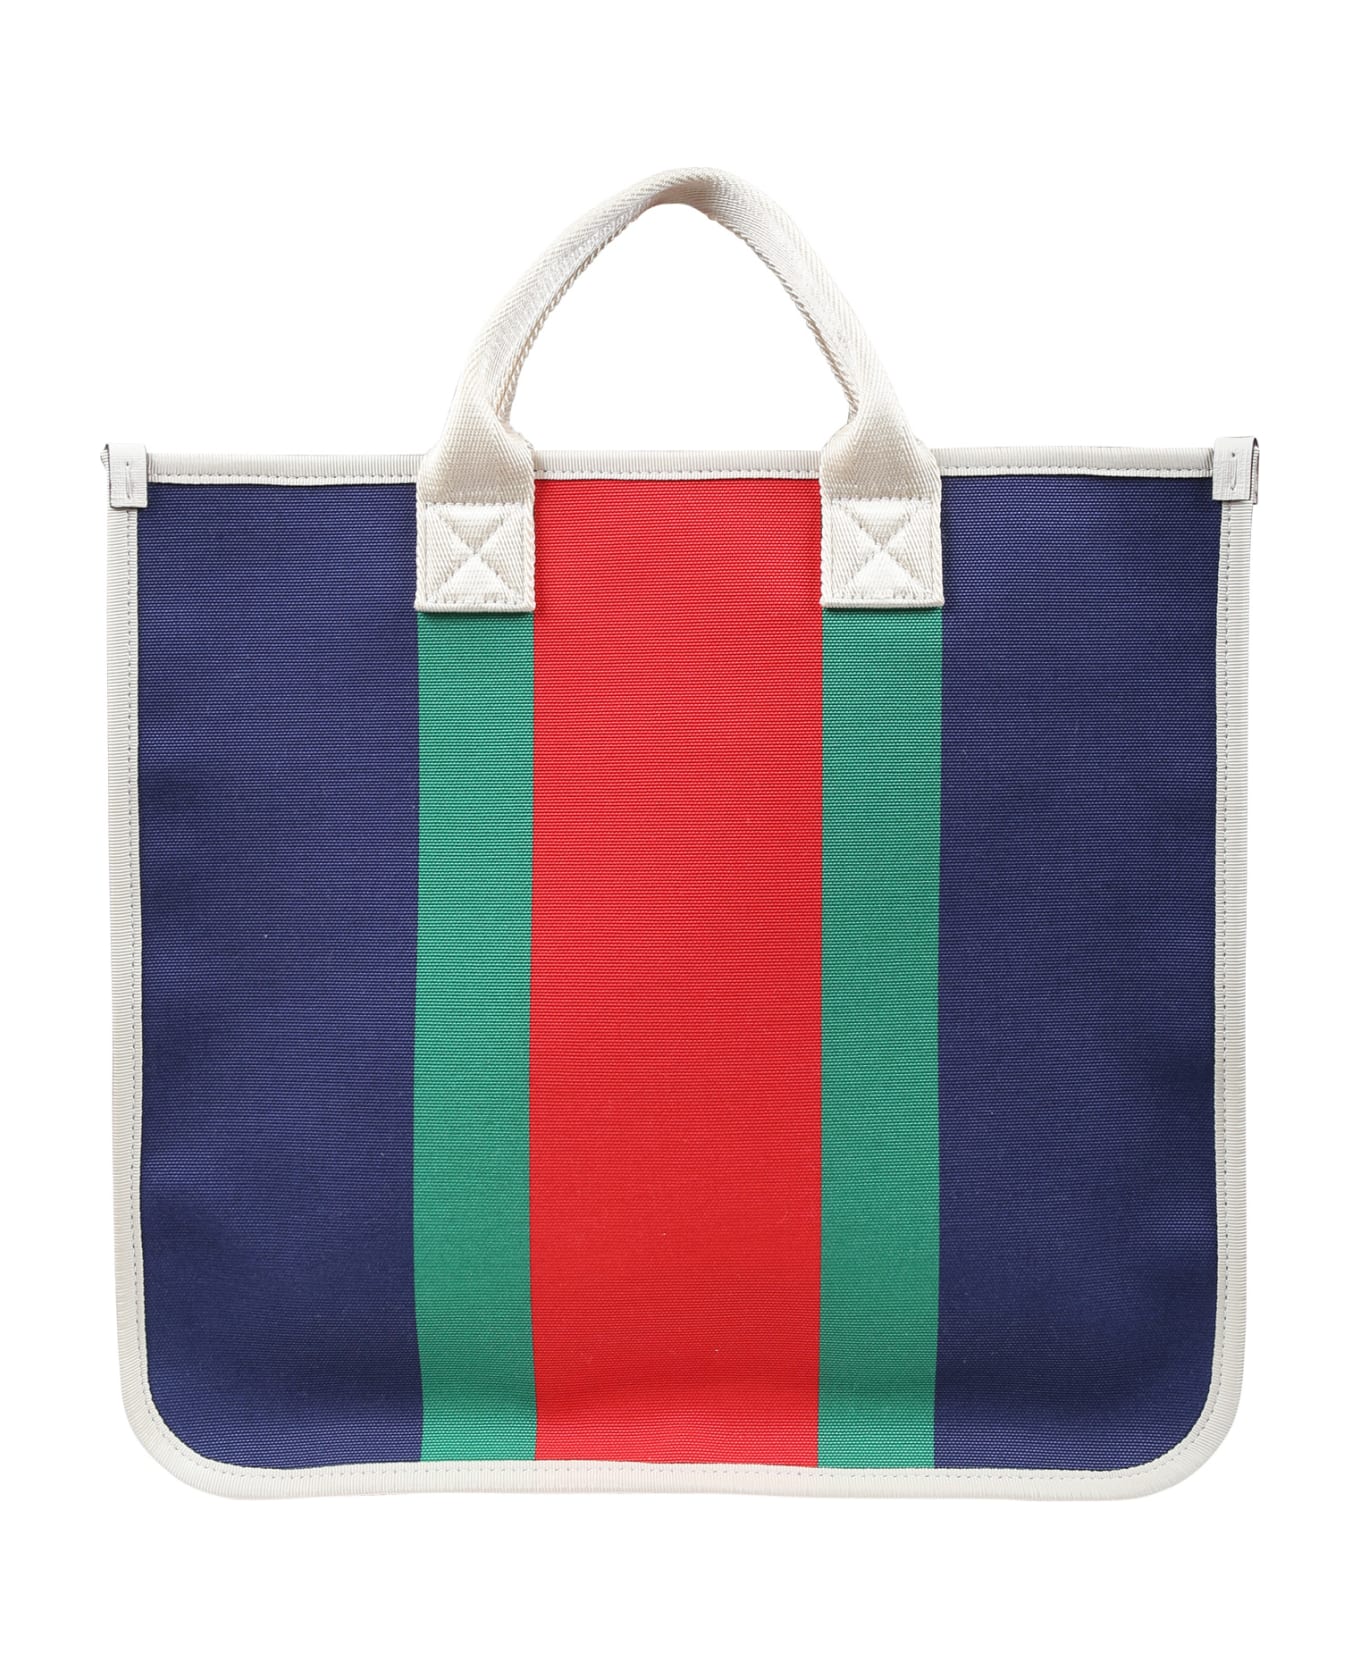 Gucci Casual Multicolor Bag For Kids With Print - Multicolor アクセサリー＆ギフト